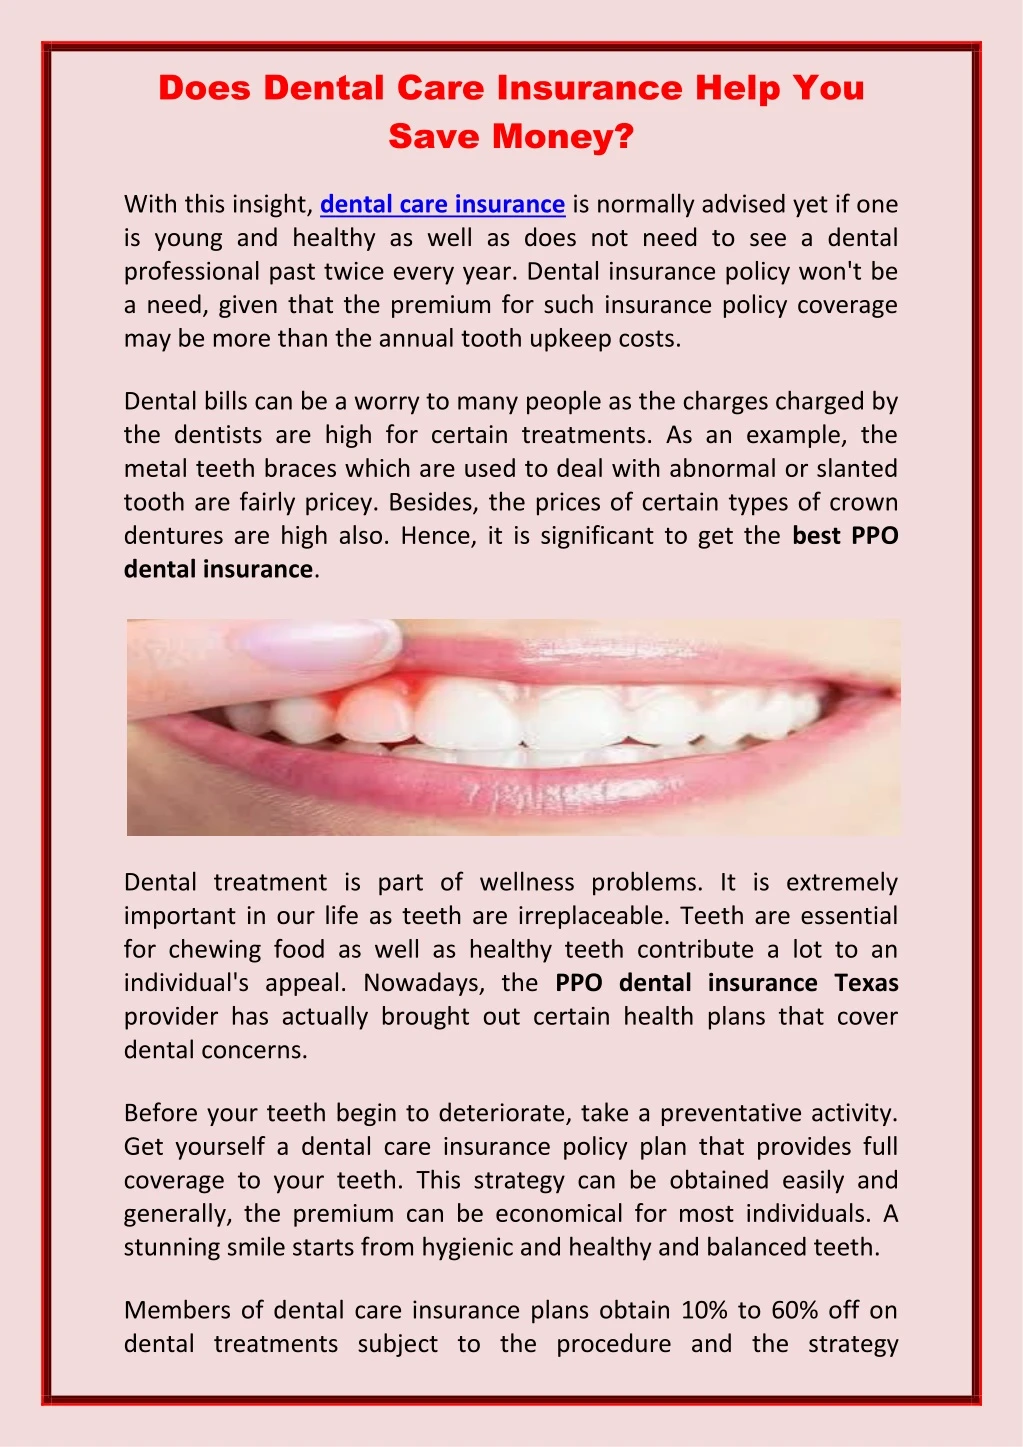 does dental care insurance help you save money